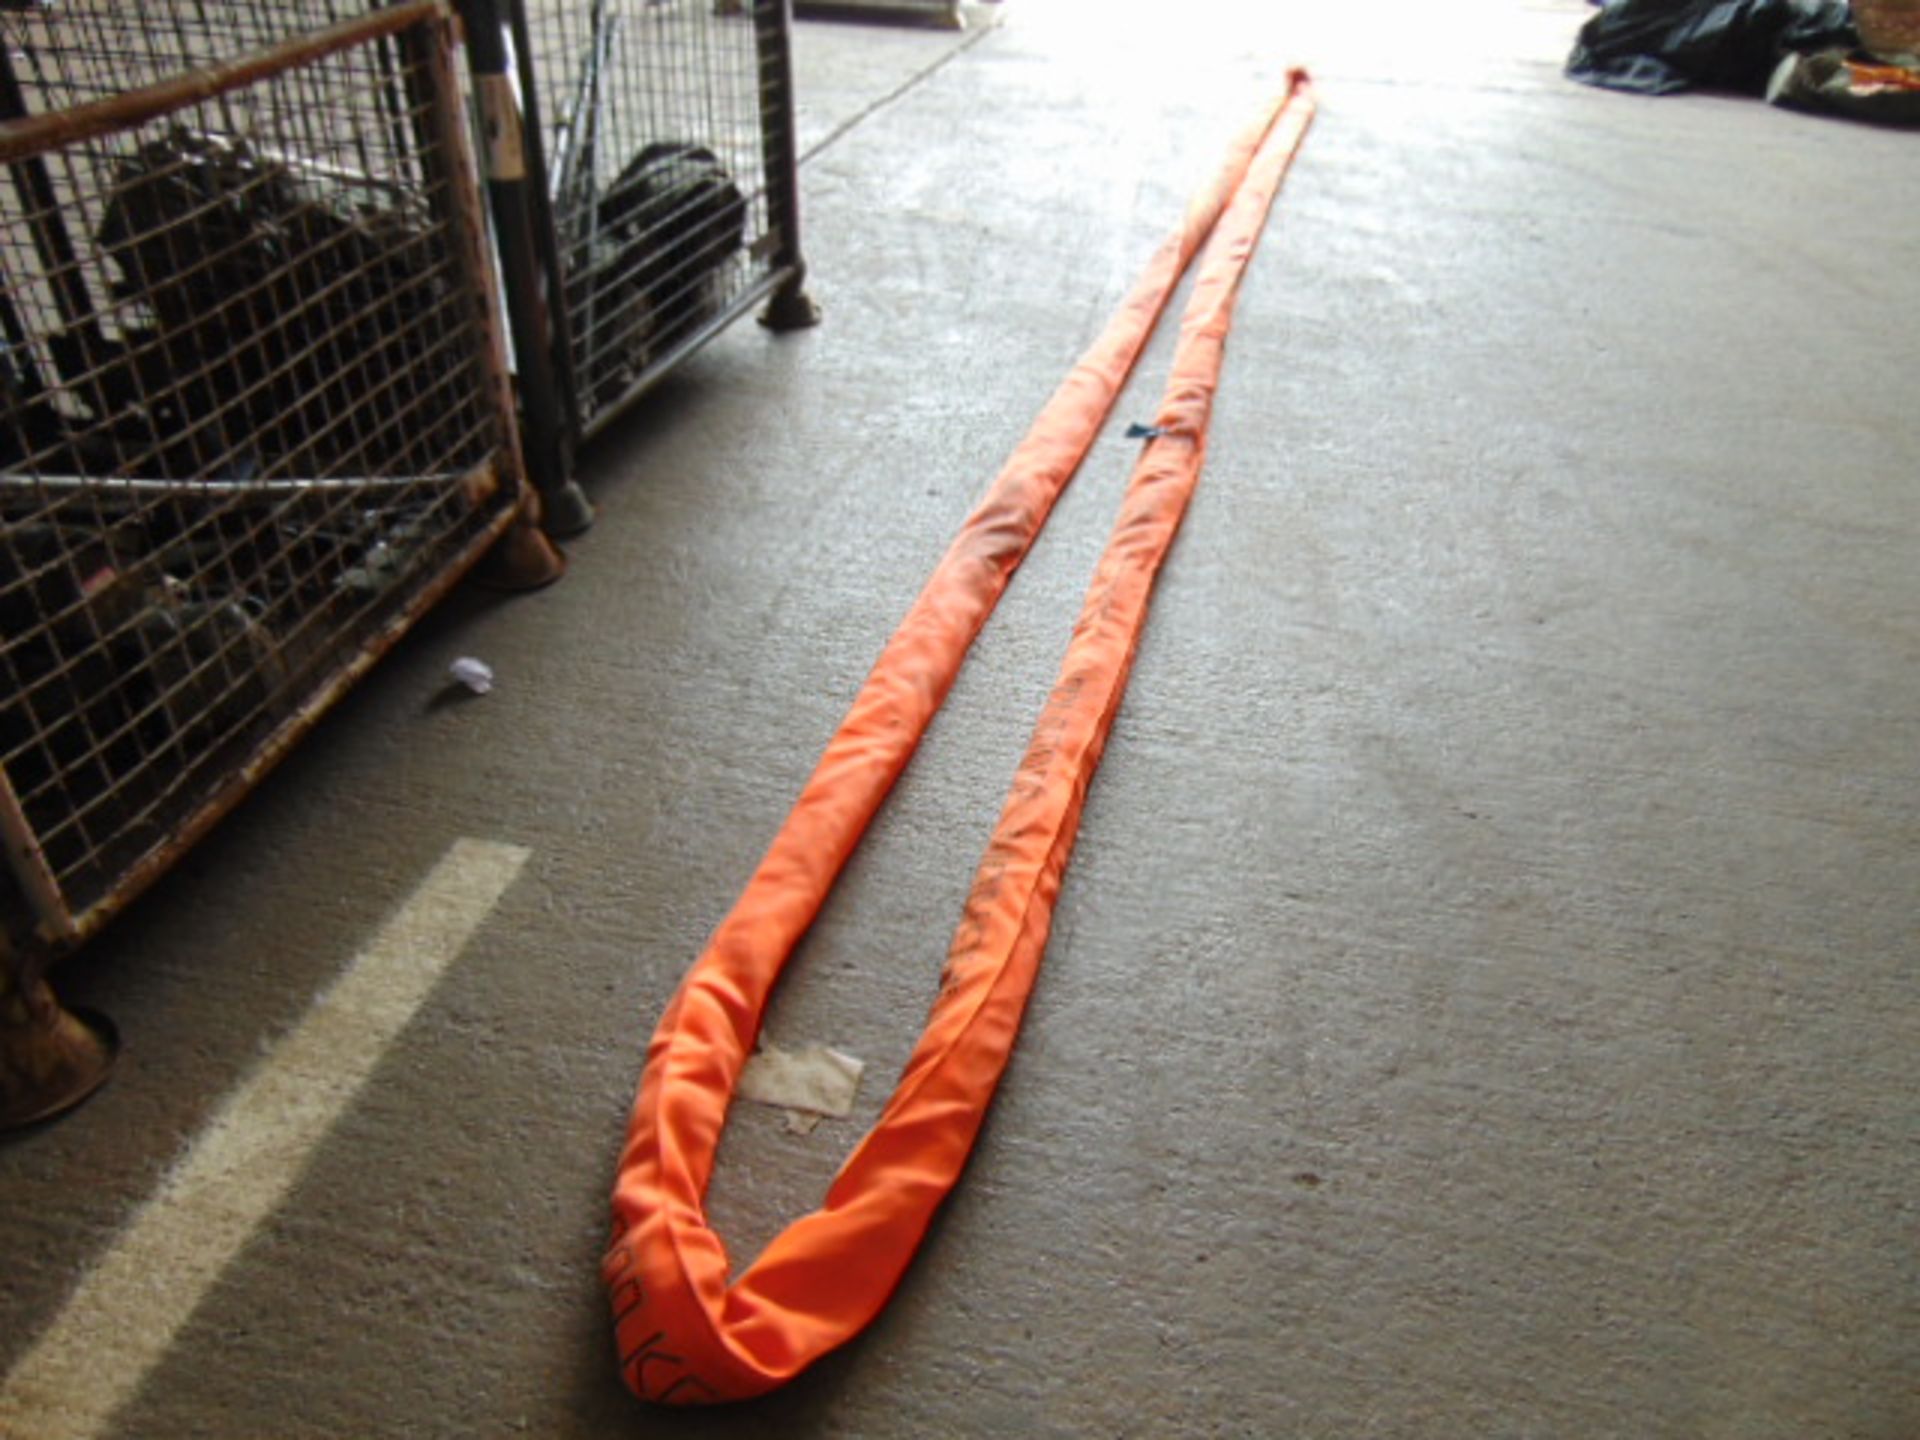 New Unused SpanSet Magnum 20,000kg Lifting/Recovery Strop from MOD - Bild 3 aus 6